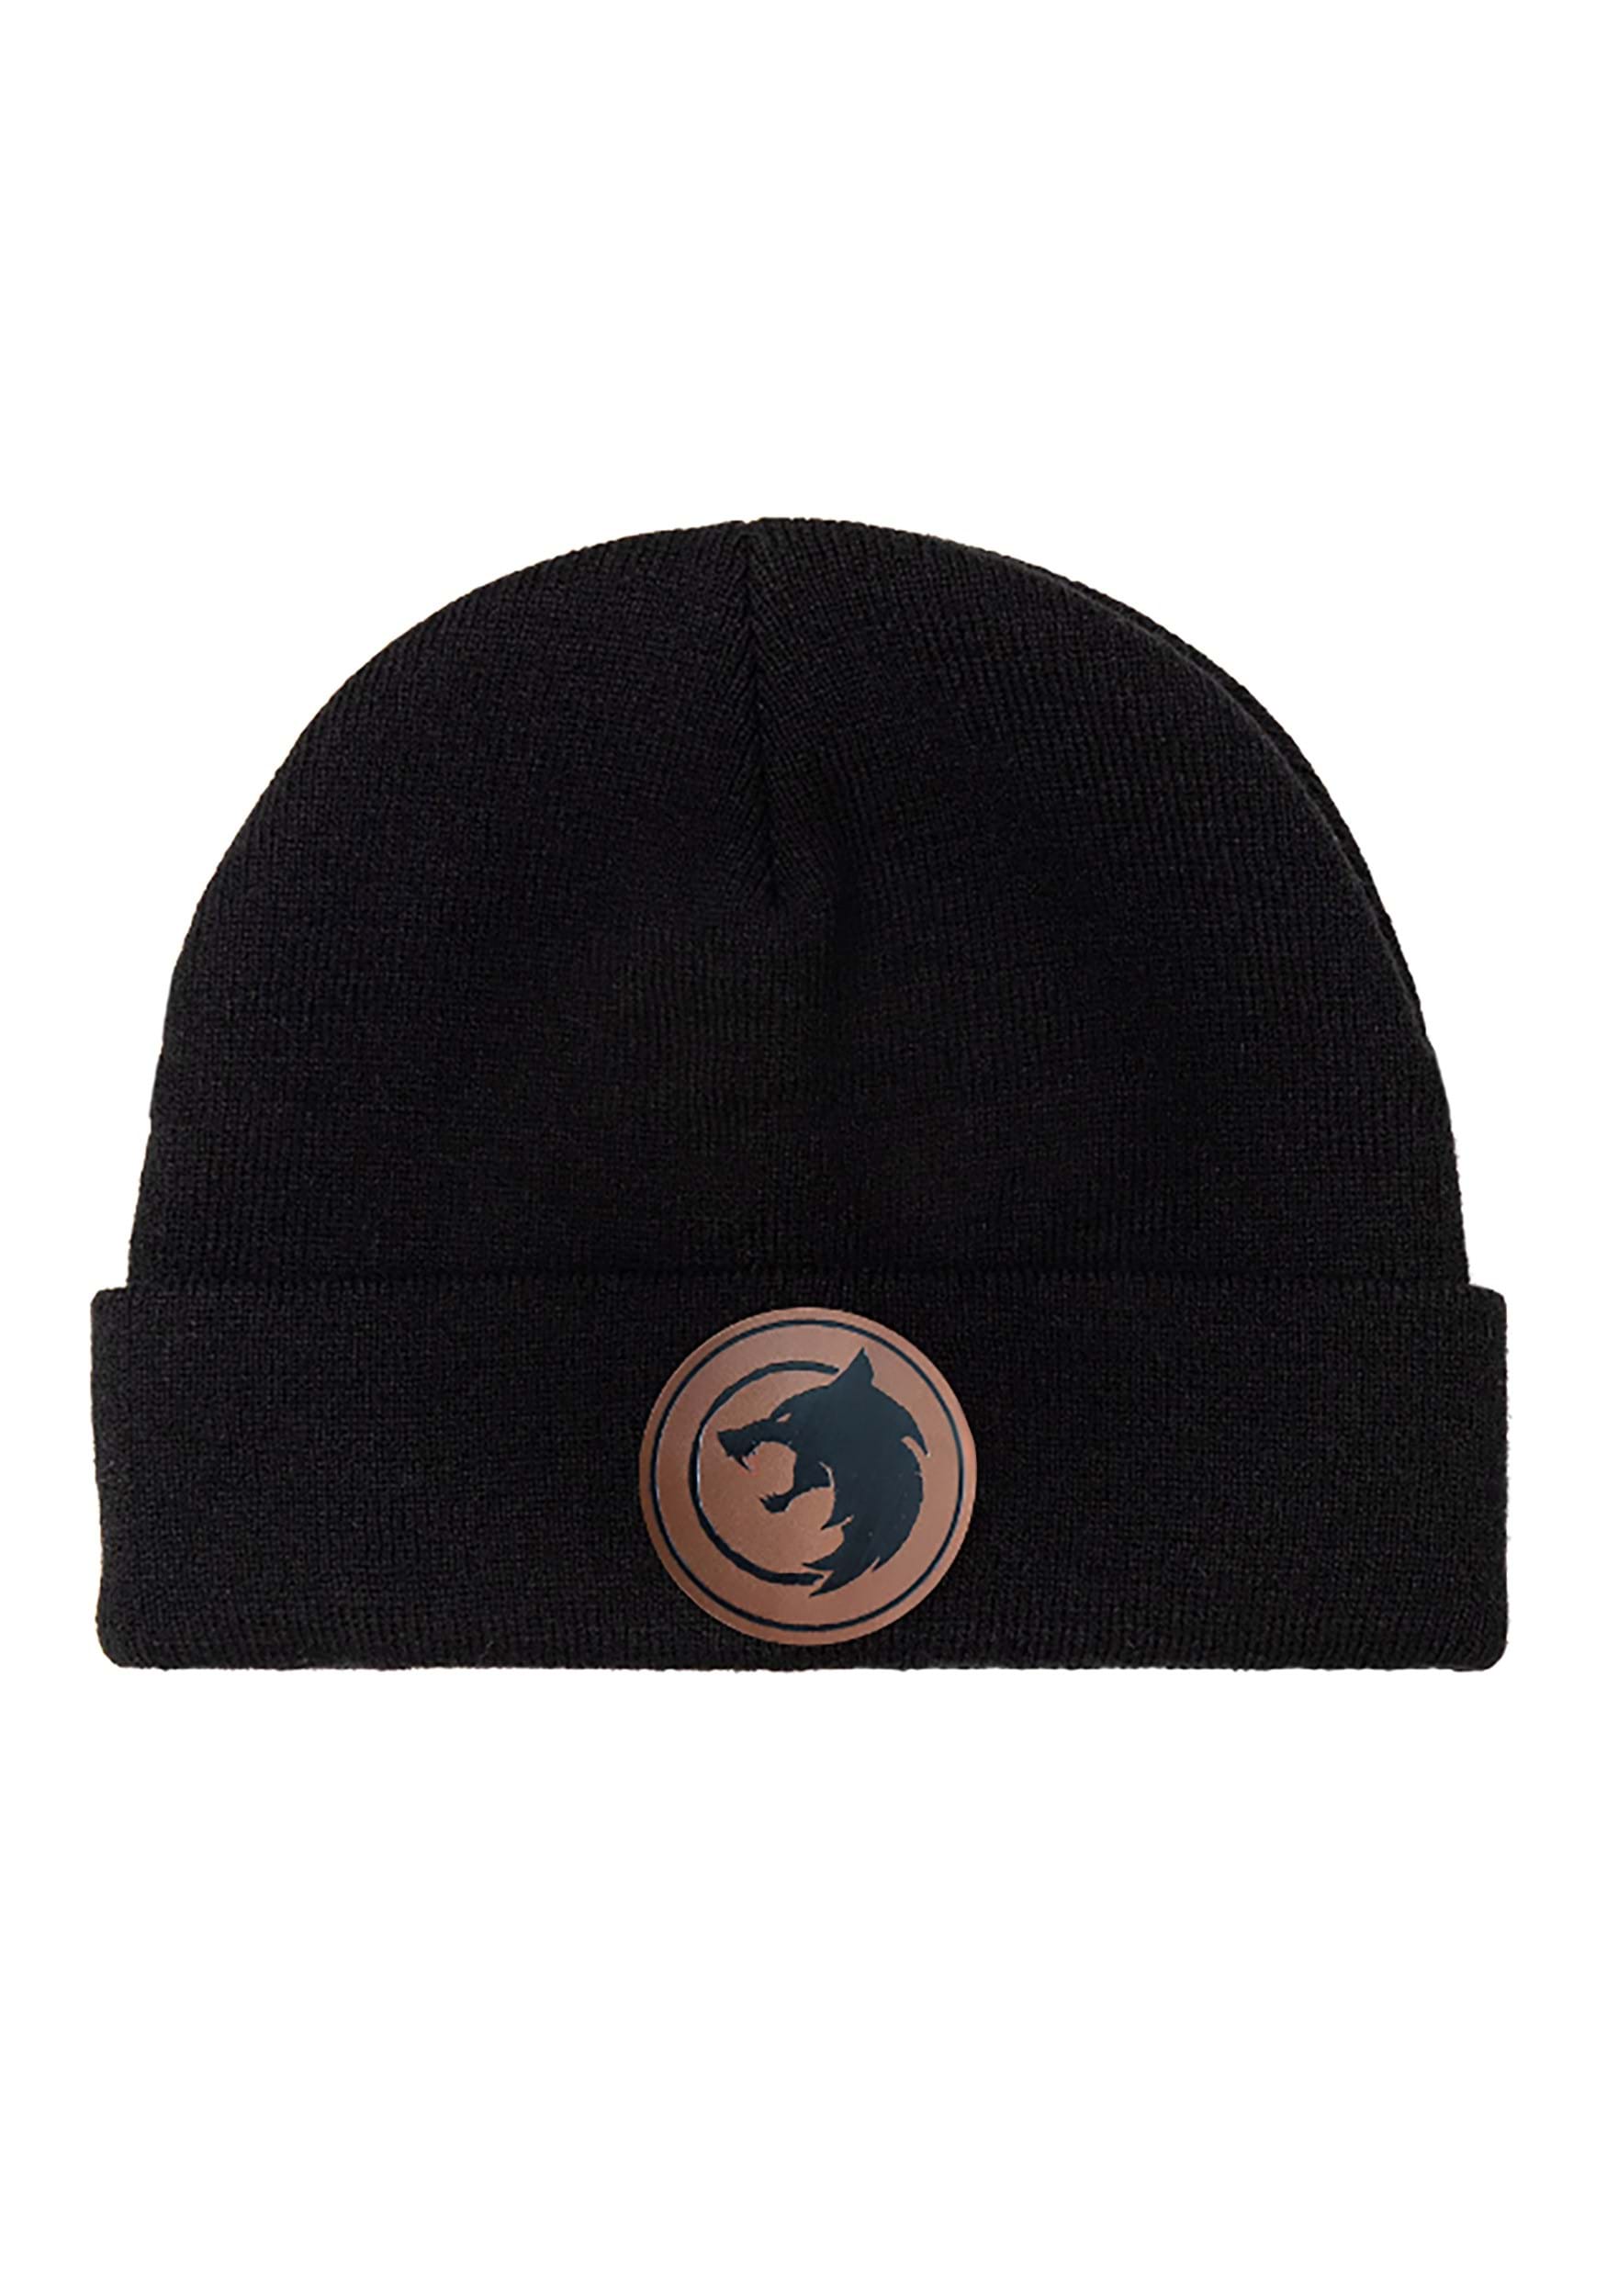 Netflix: The Witcher Series Hunters Life Beanie